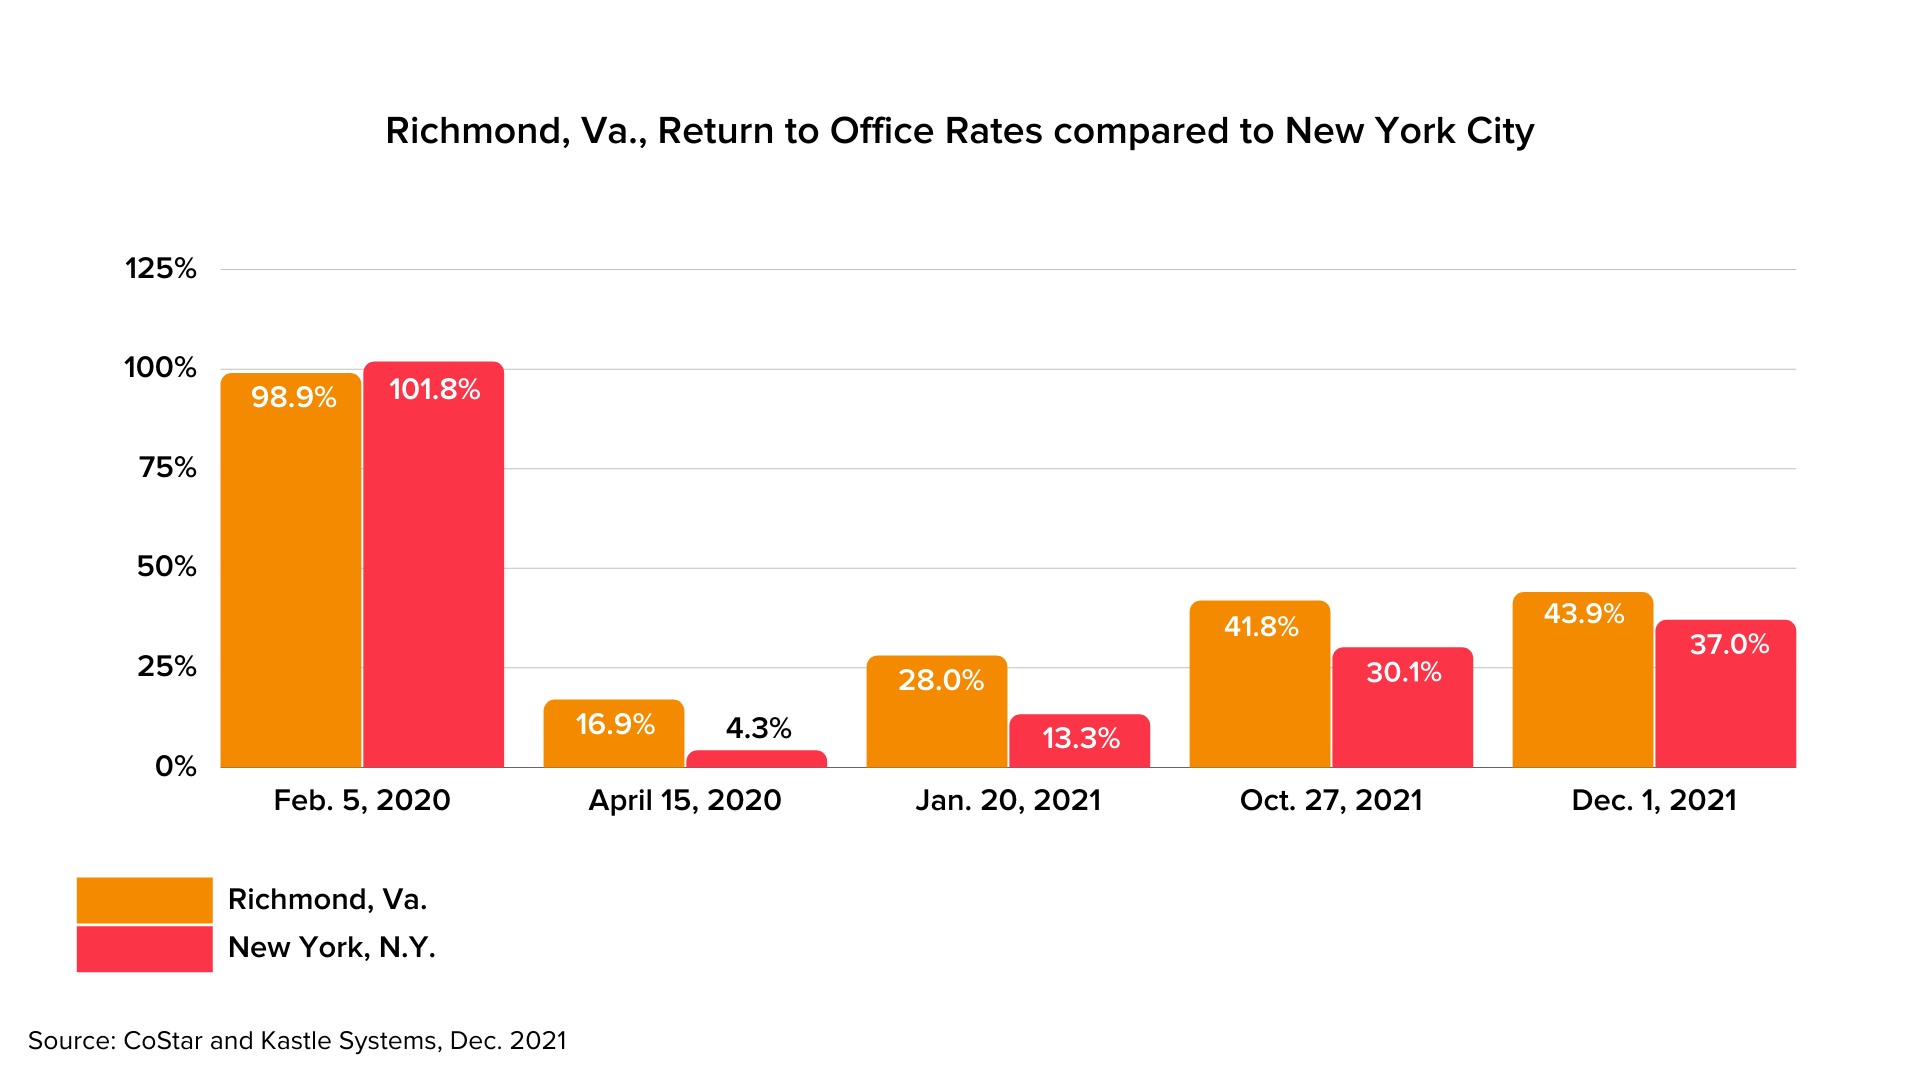 Return to Office rates compared between Richmond and New York